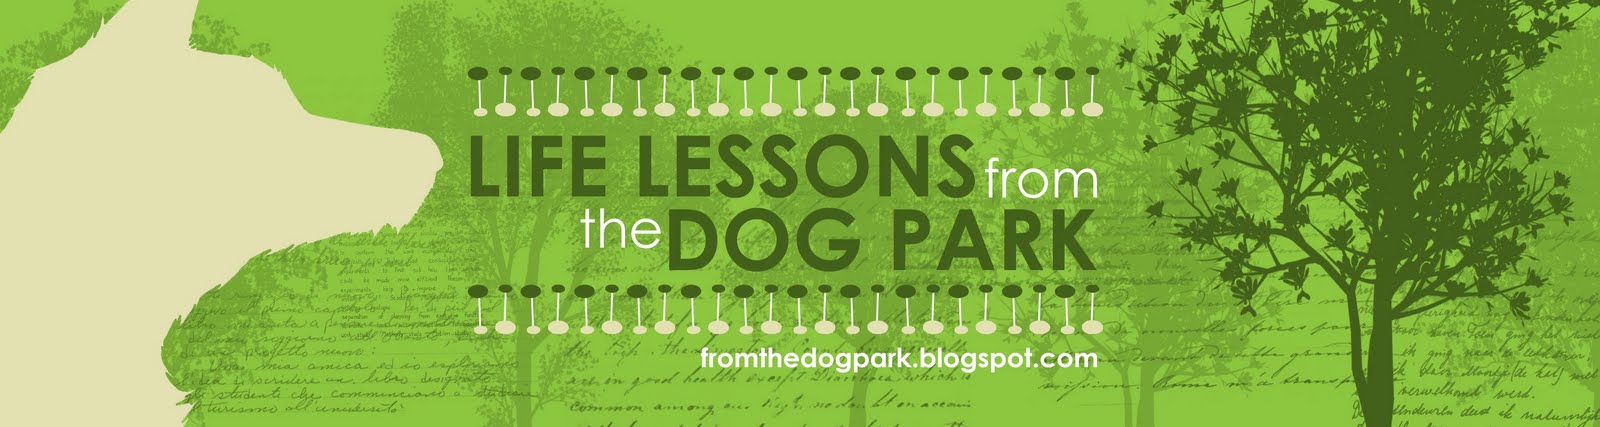 Life Lessons From the Dog Park